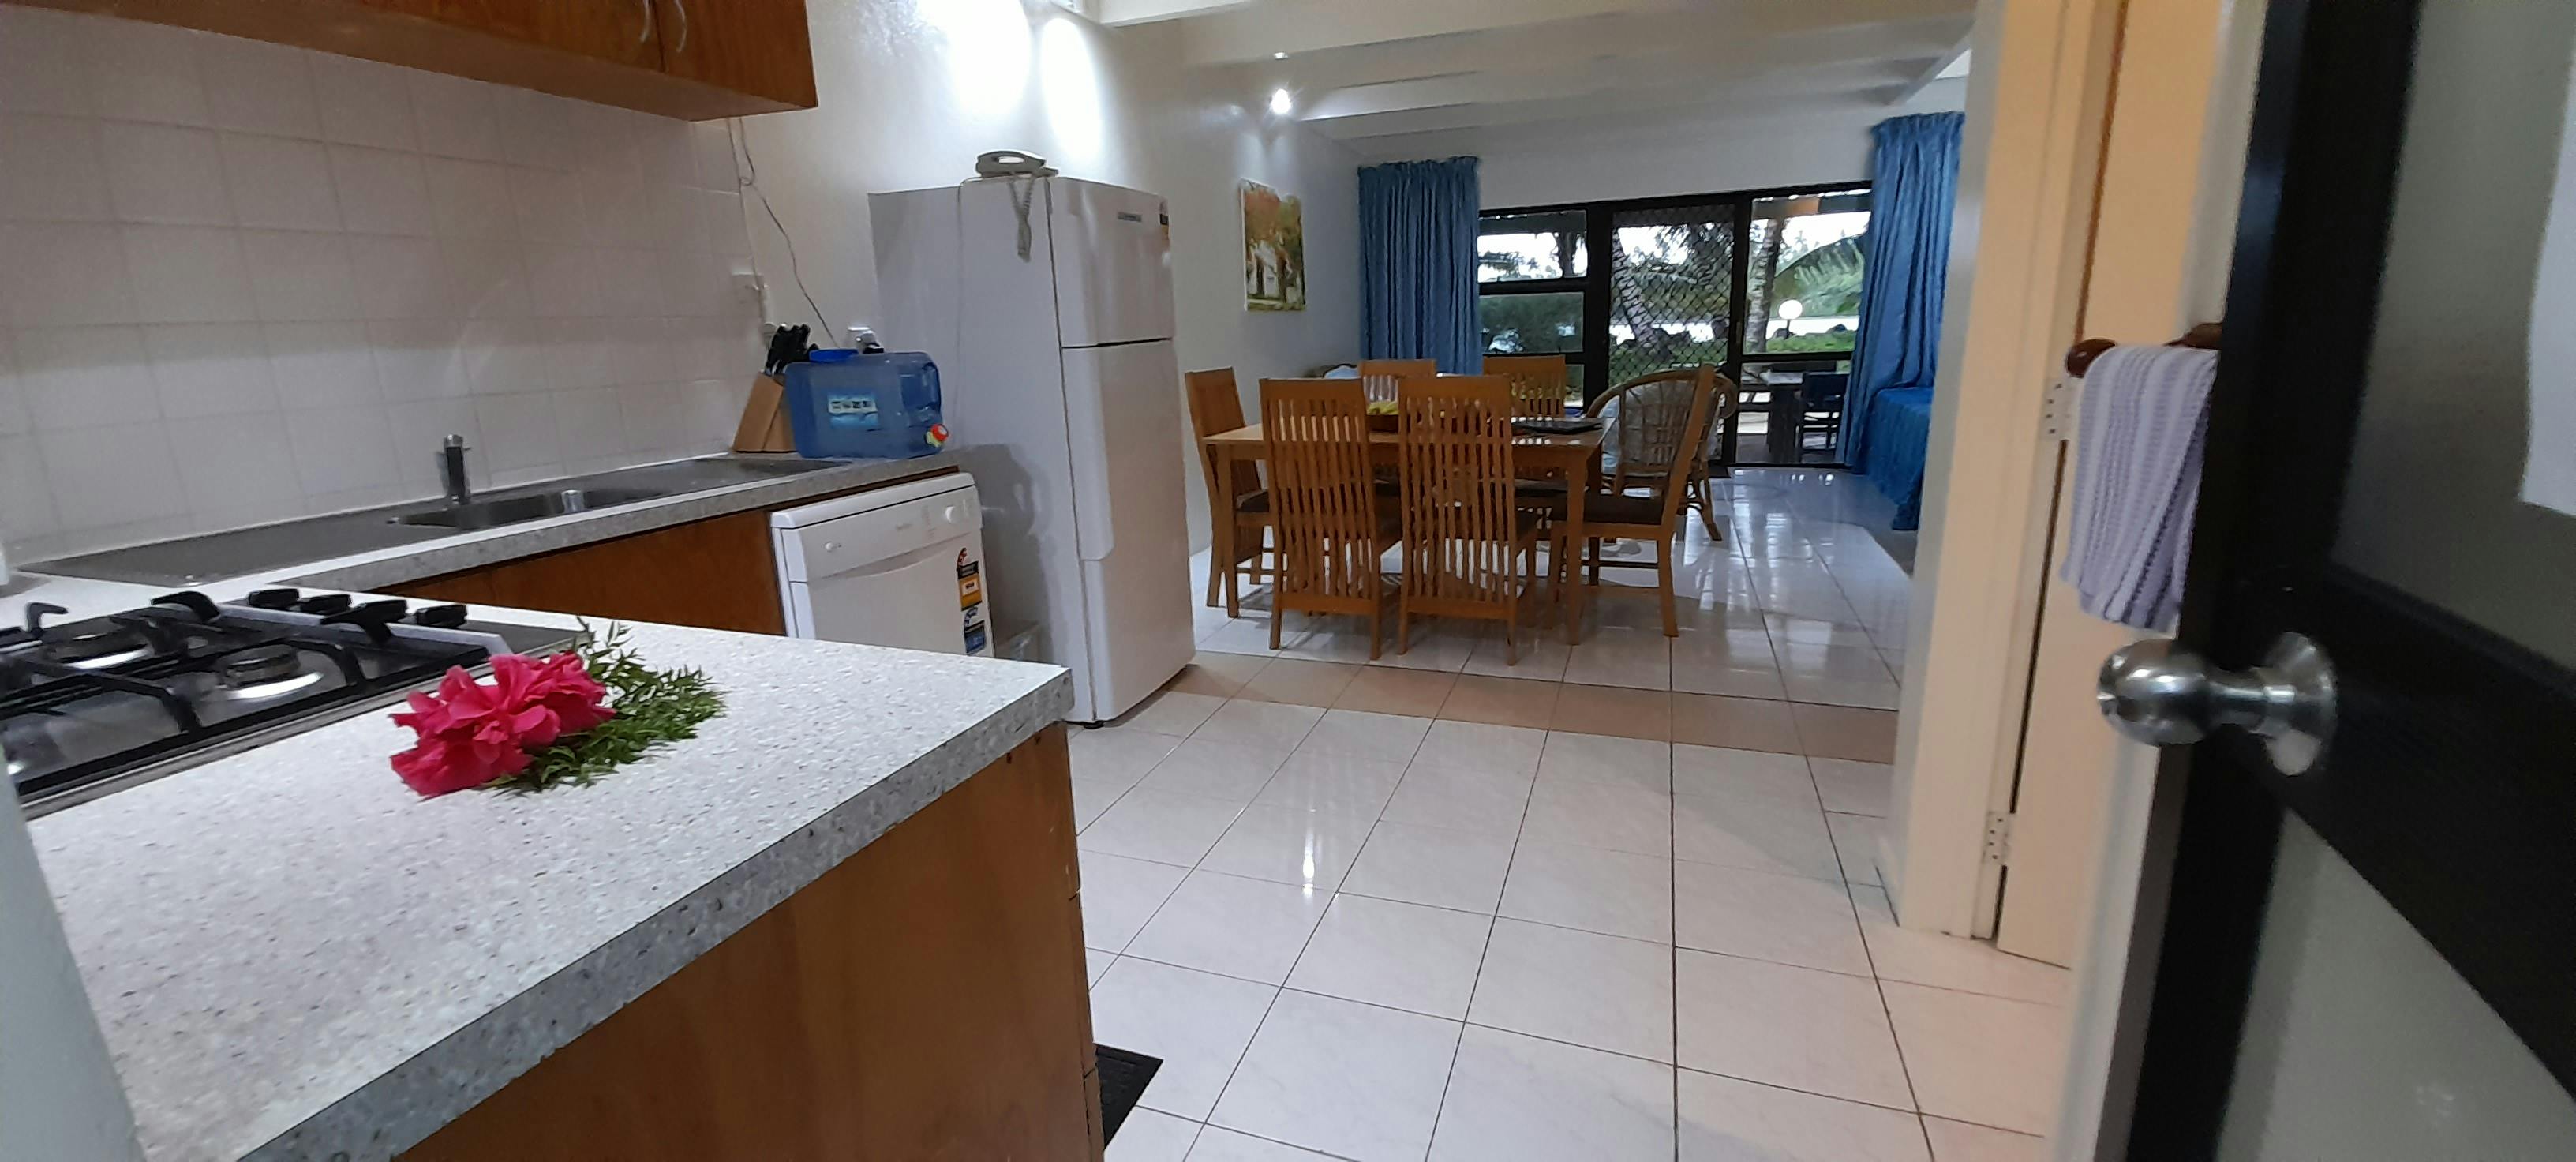 3 bedroom apartments- kitchen, dining area.